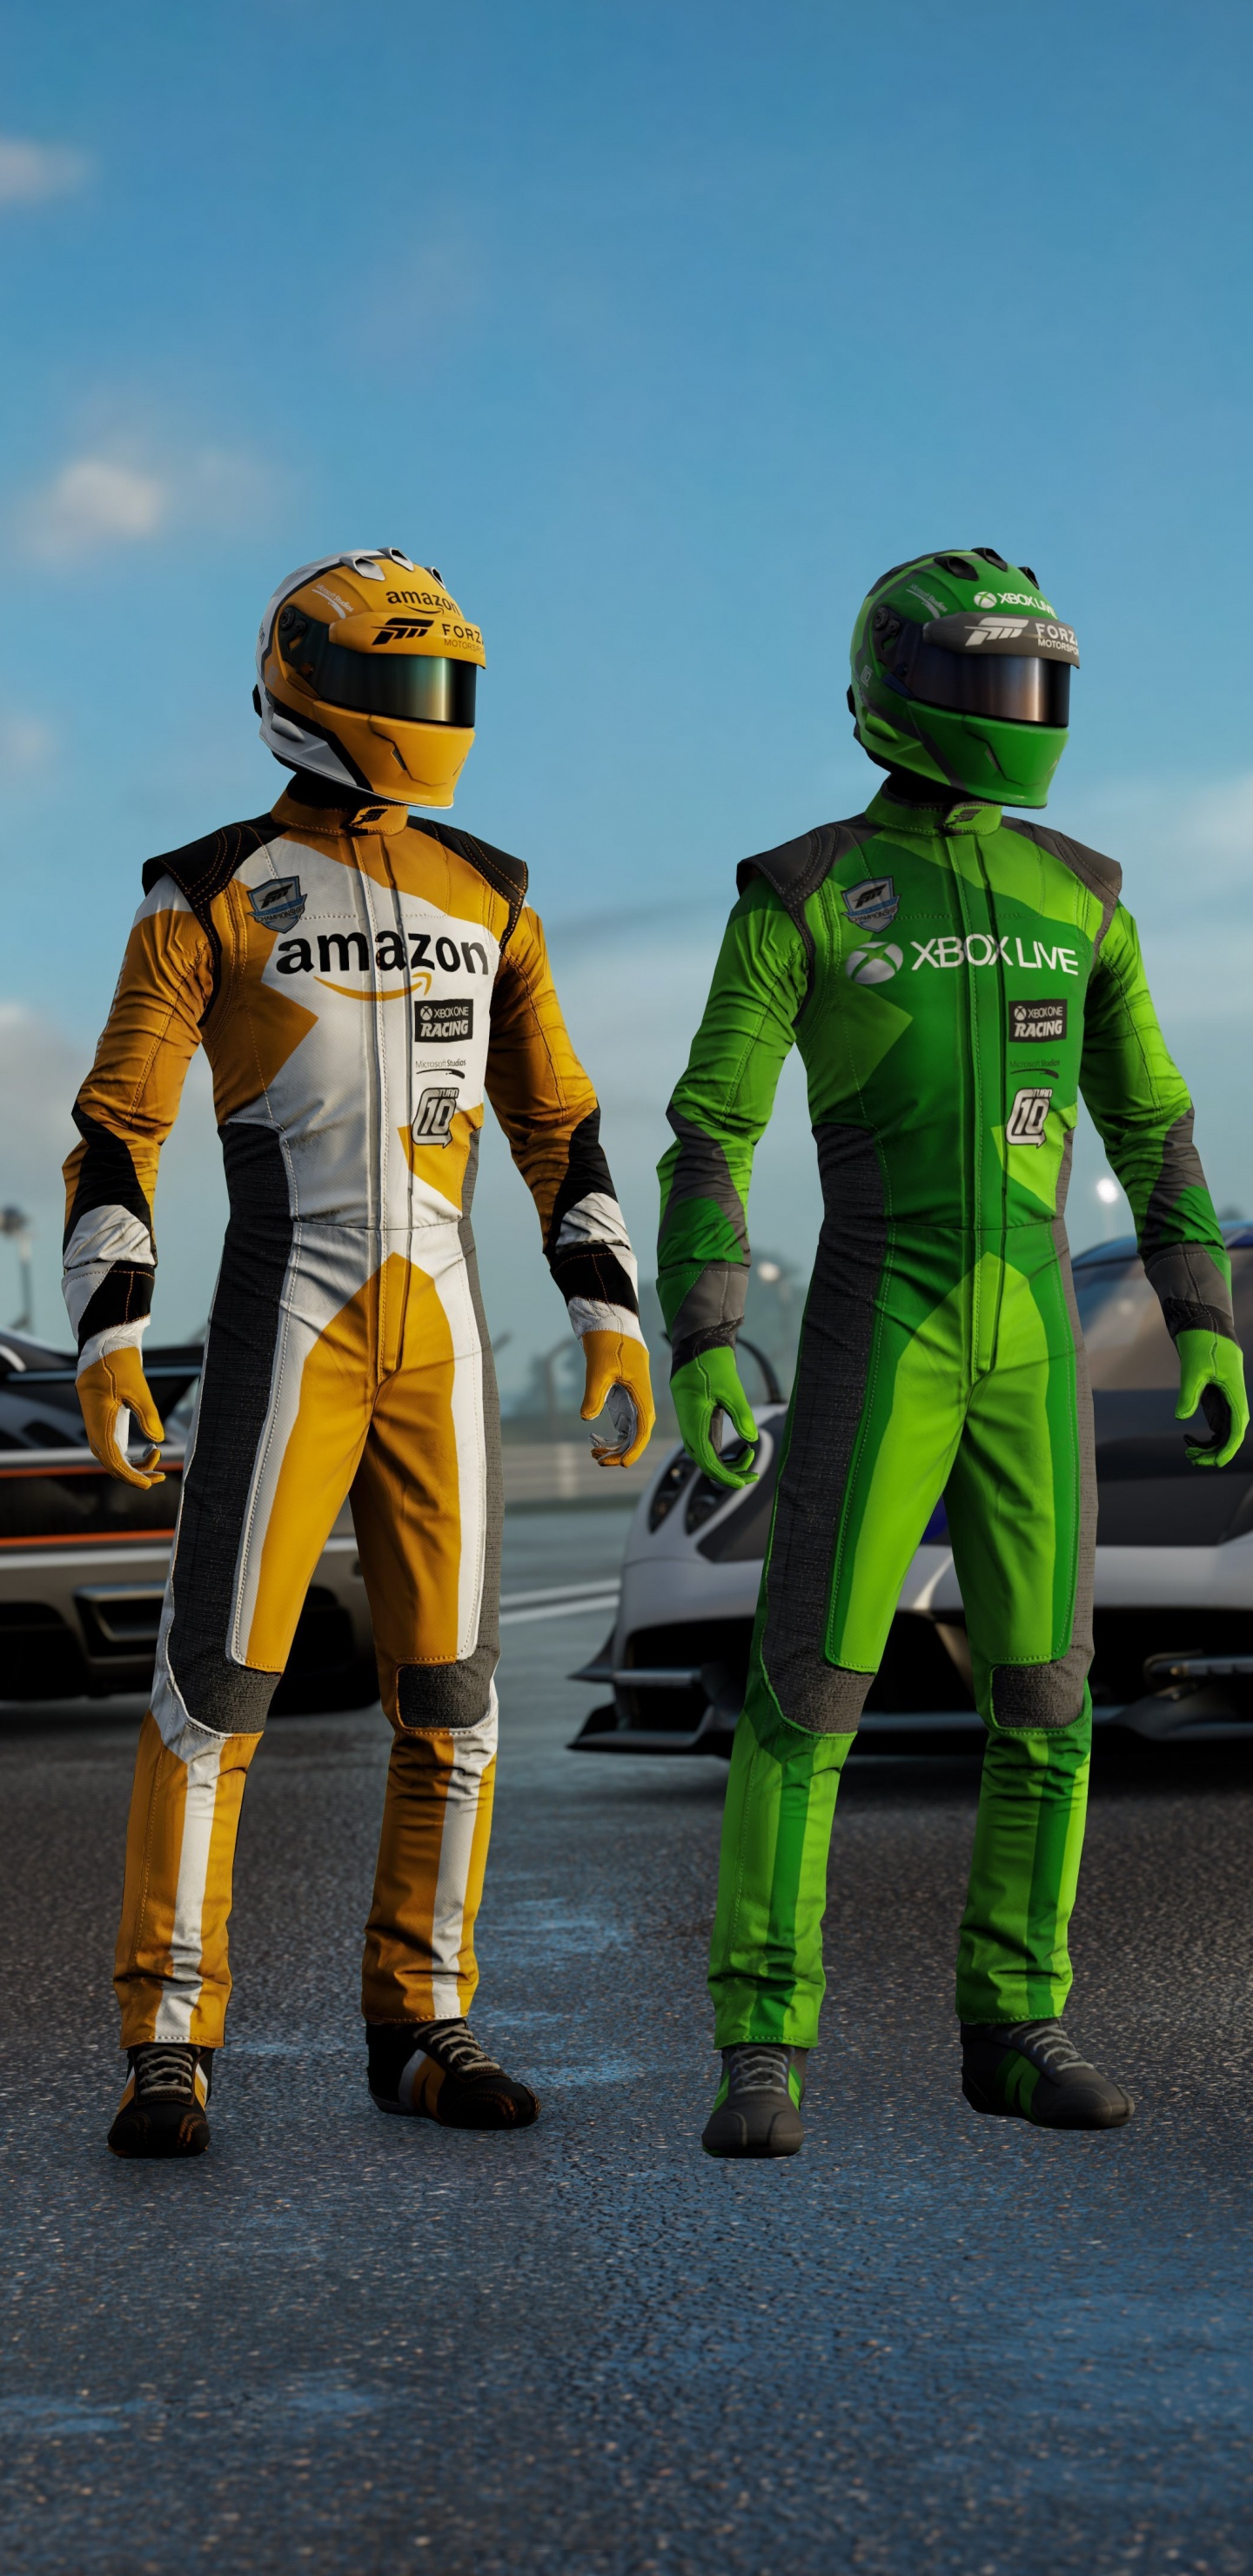 2 Men in Green and Yellow Helmet and Helmet Standing Beside White Sports Car During Daytime. Wallpaper in 1440x2960 Resolution